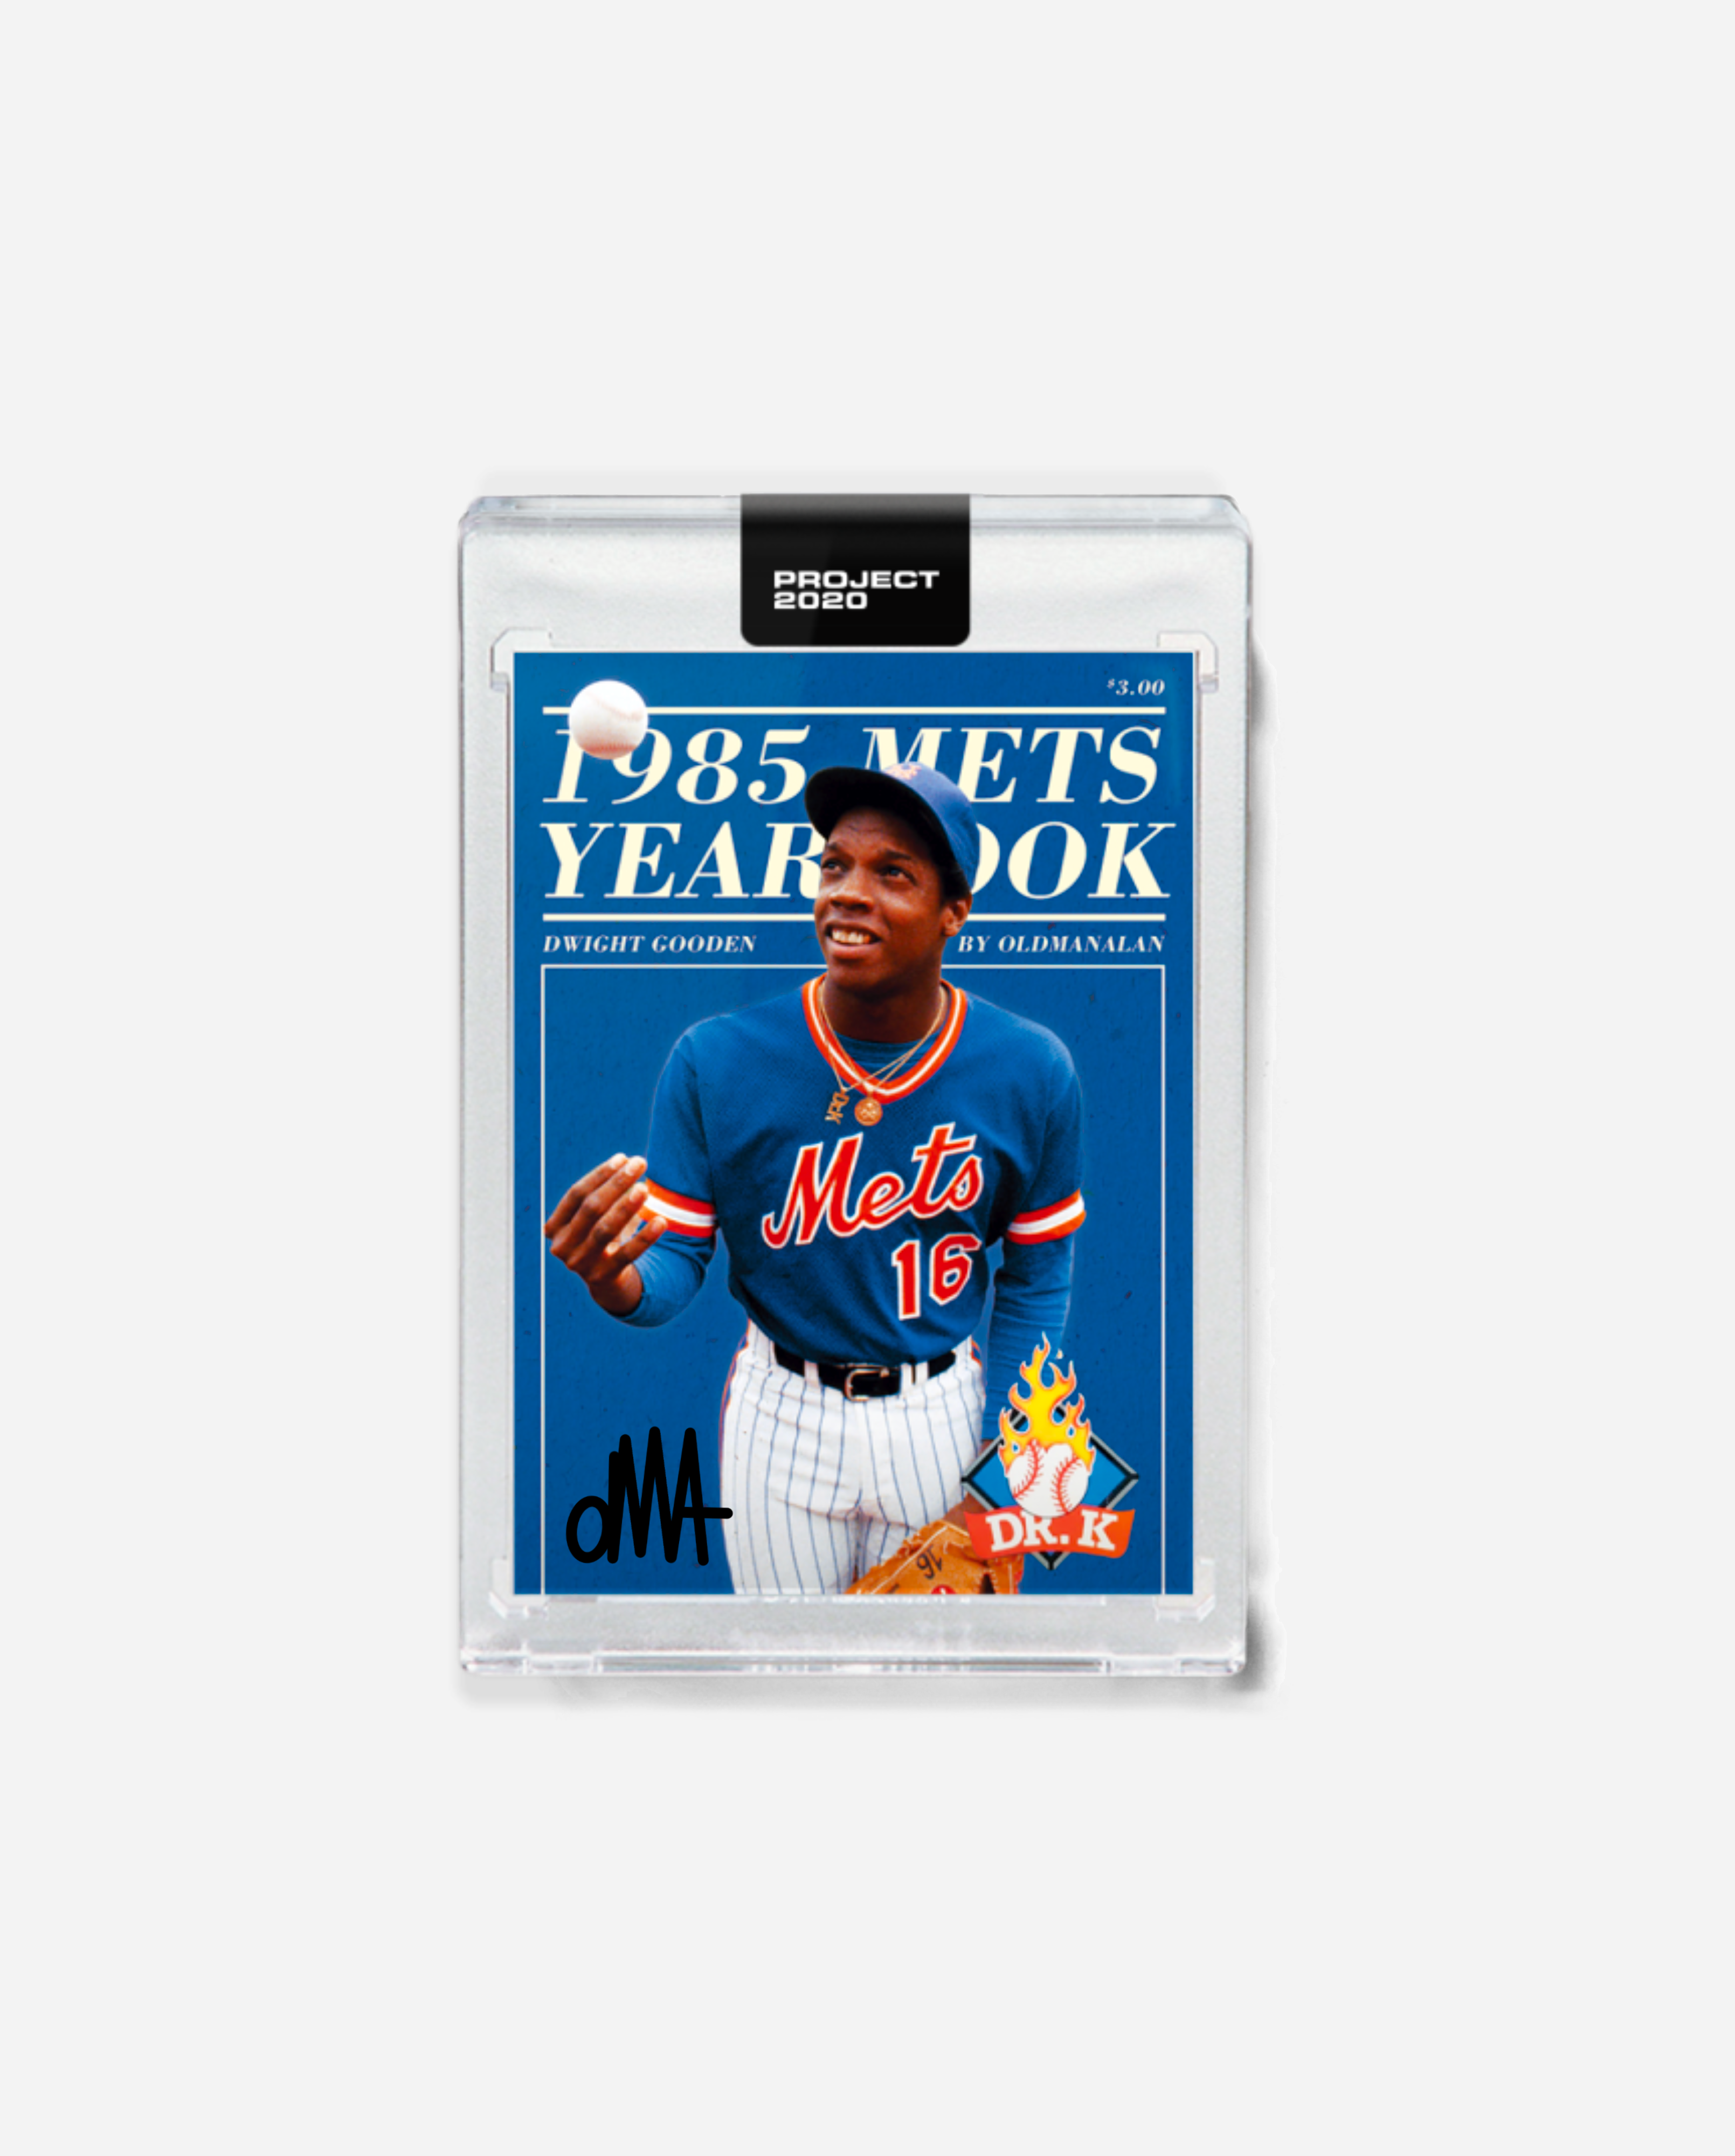 Dwight Gooden x oMA x Topps Project 2020 Autographed Card